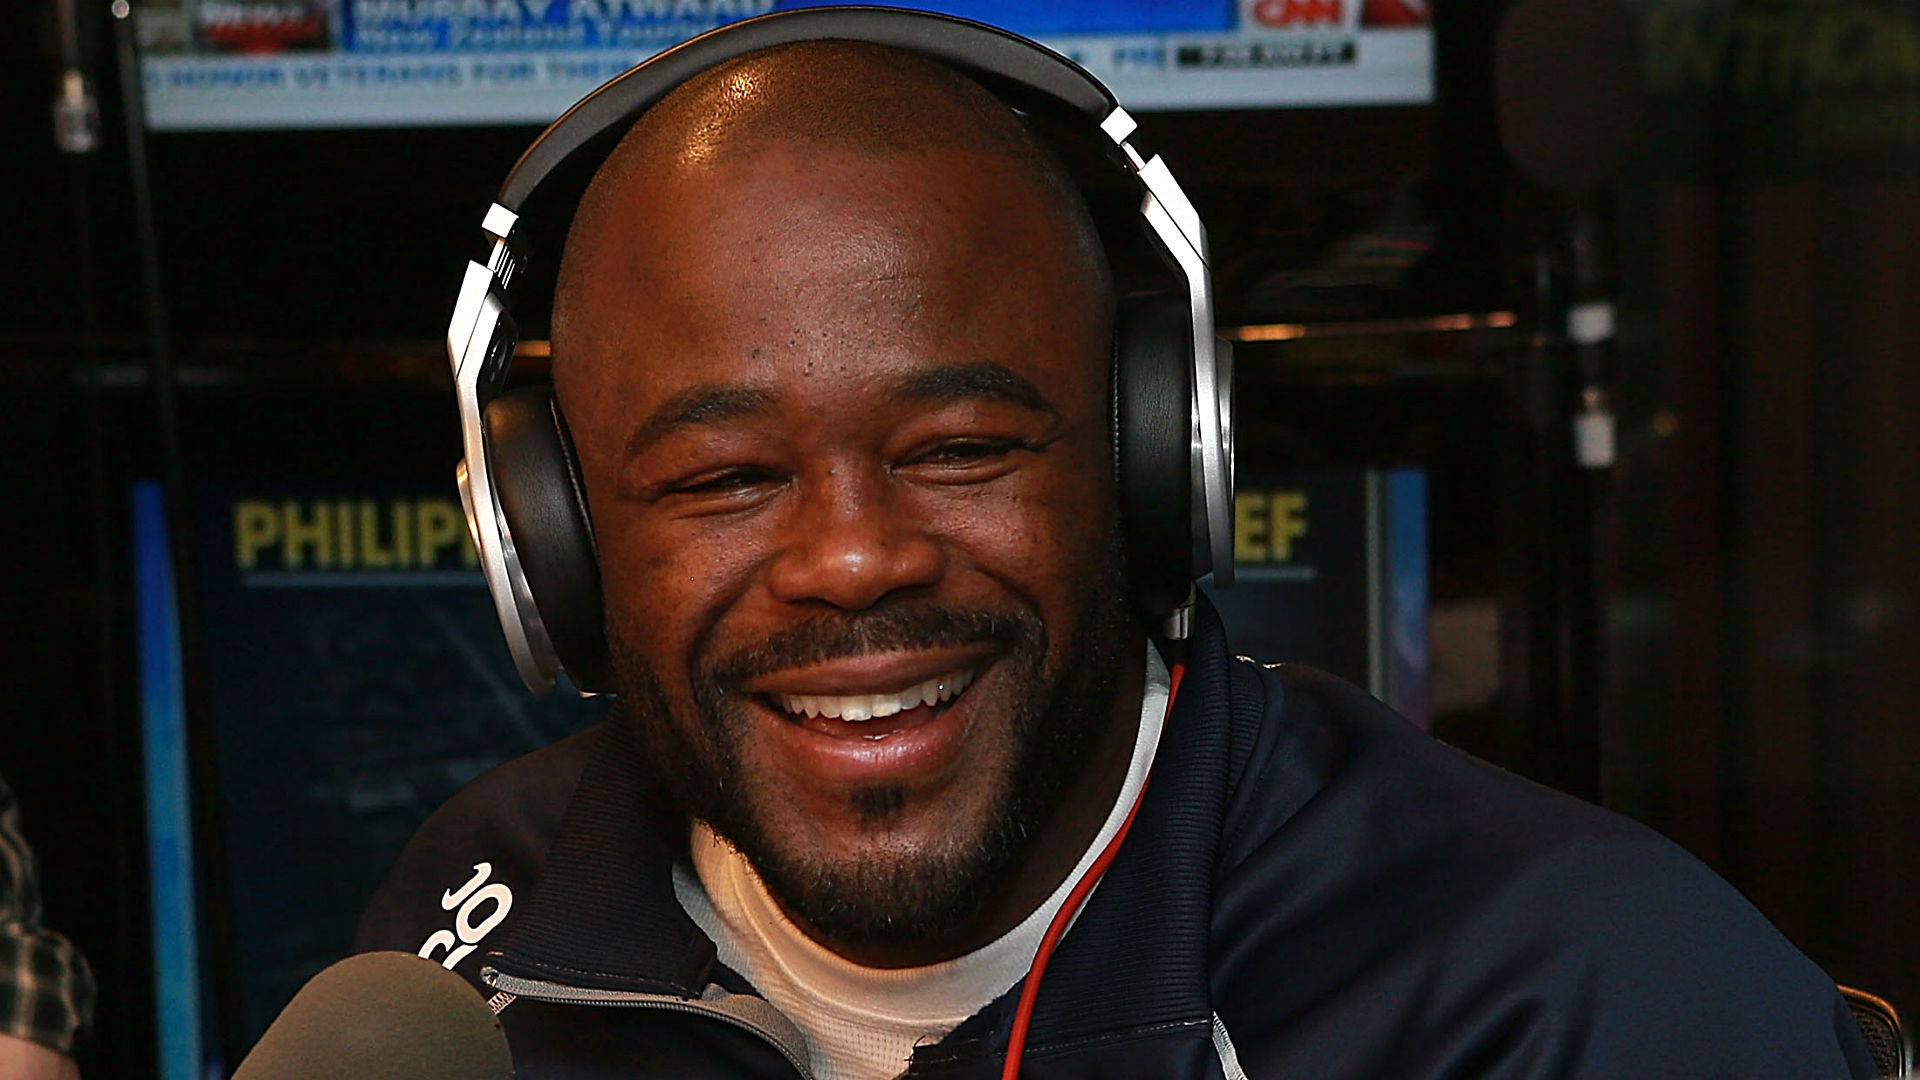 Rashad Evans to be inducted into the UFC Hall Of Fame - Planet MMA